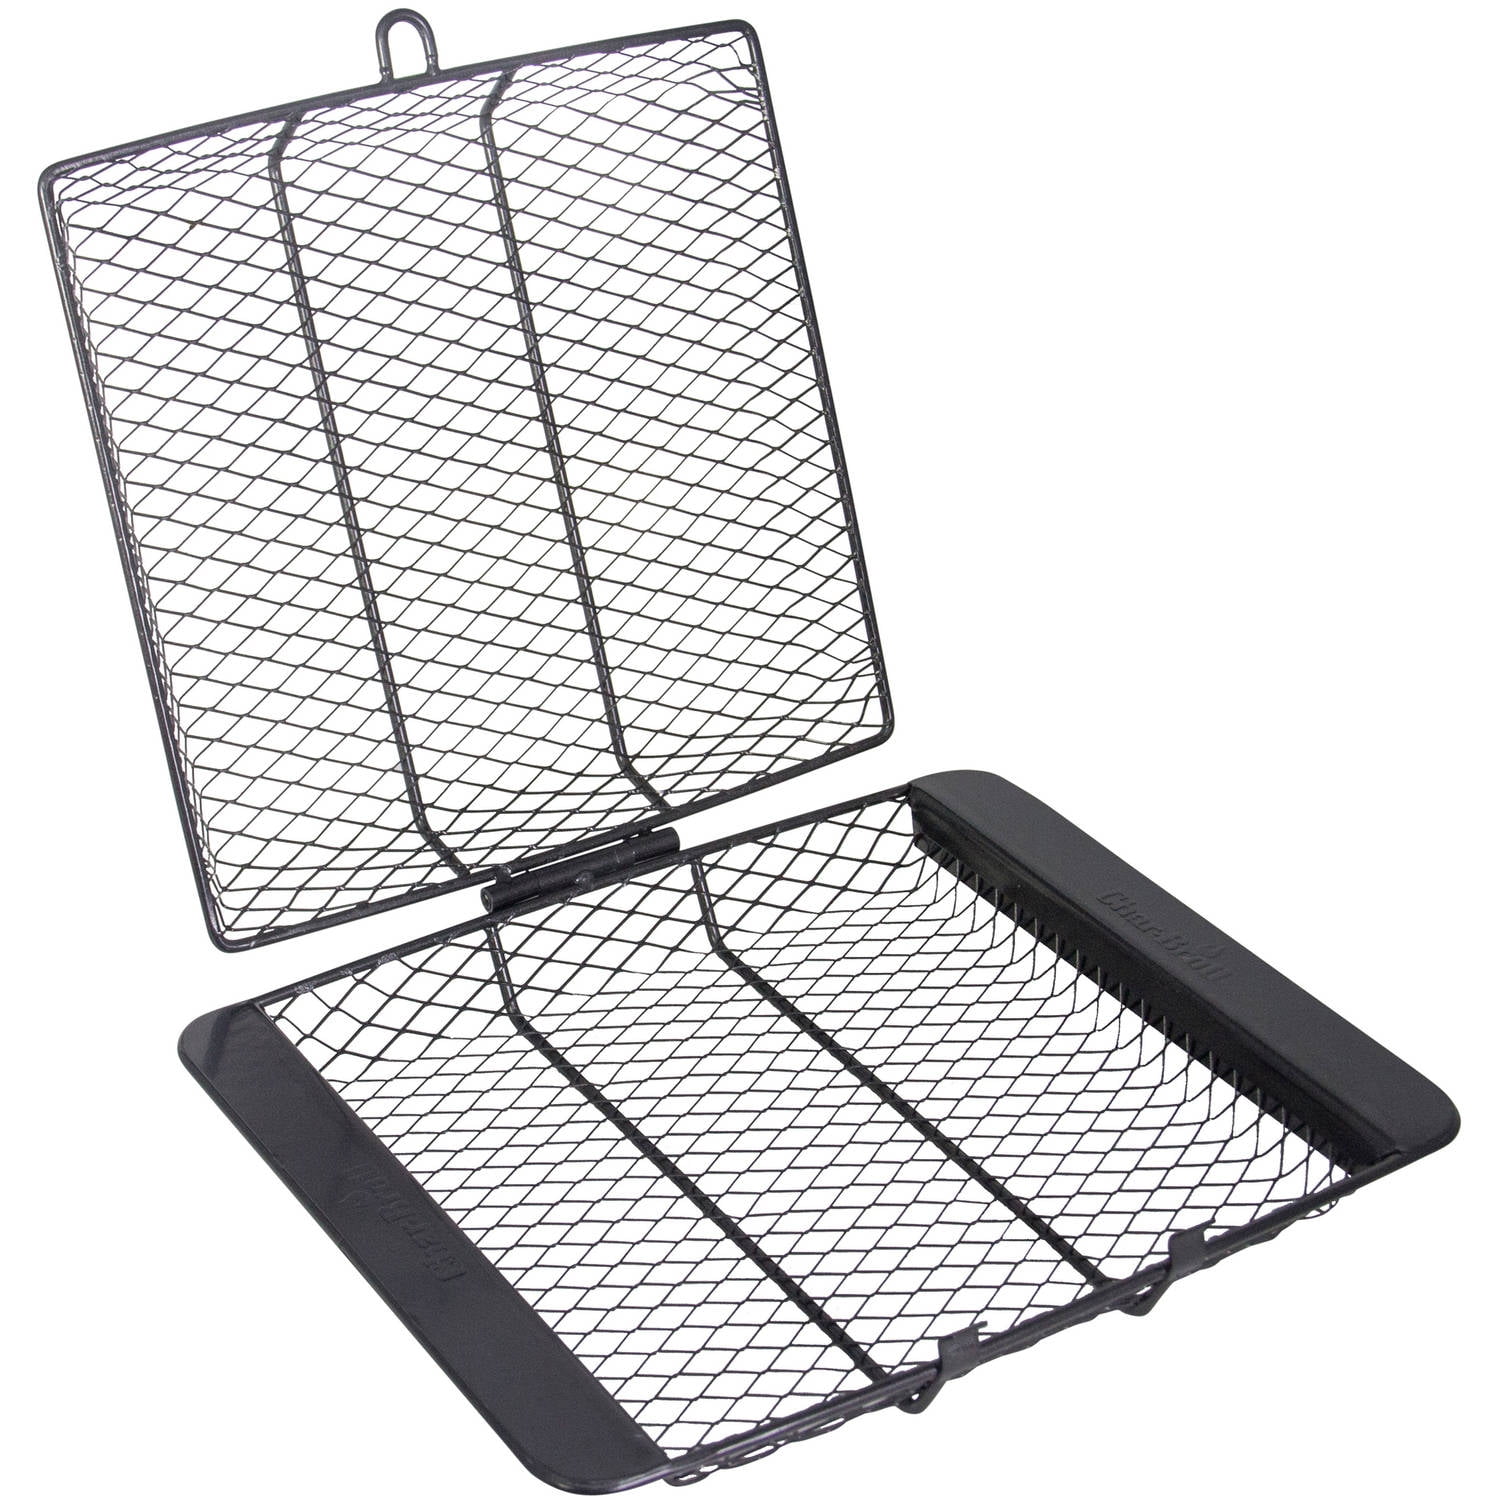 Vegetables Grilling Basket  Free Shipping Charbroil Stainless Steel Fish 